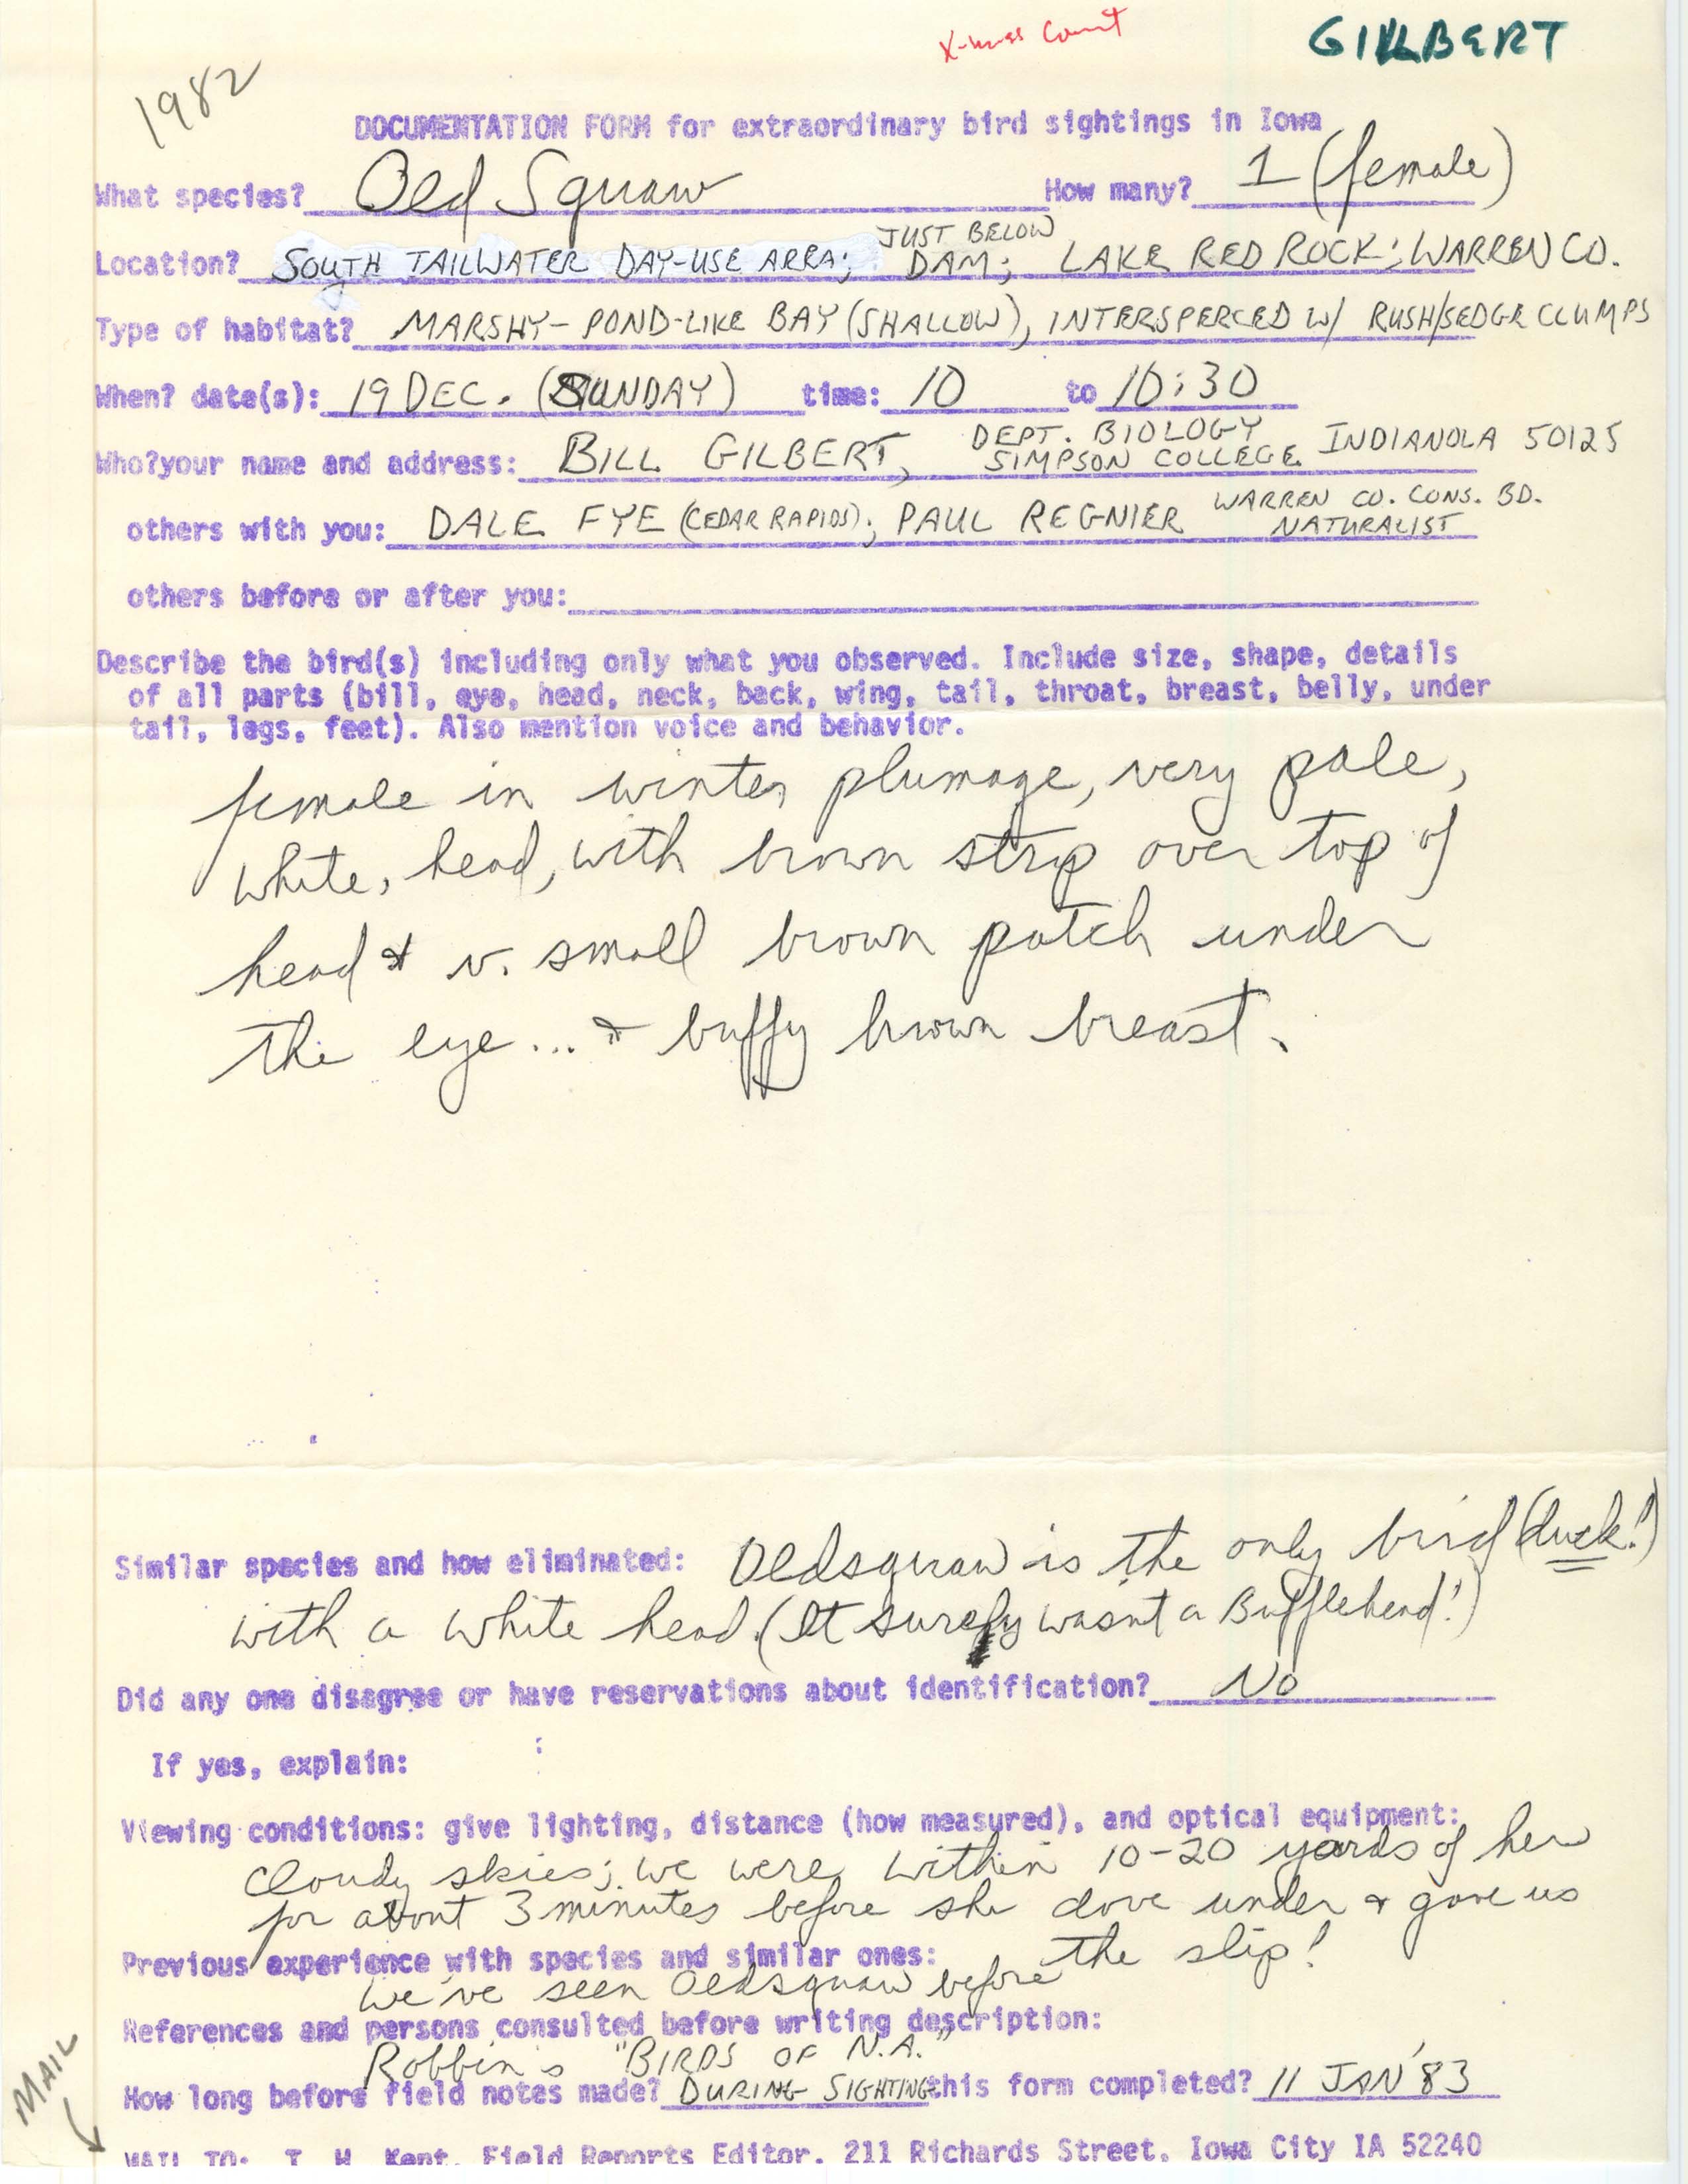 Rare bird documentation form for Long-tailed Duck at Lake Red Rock, 1982